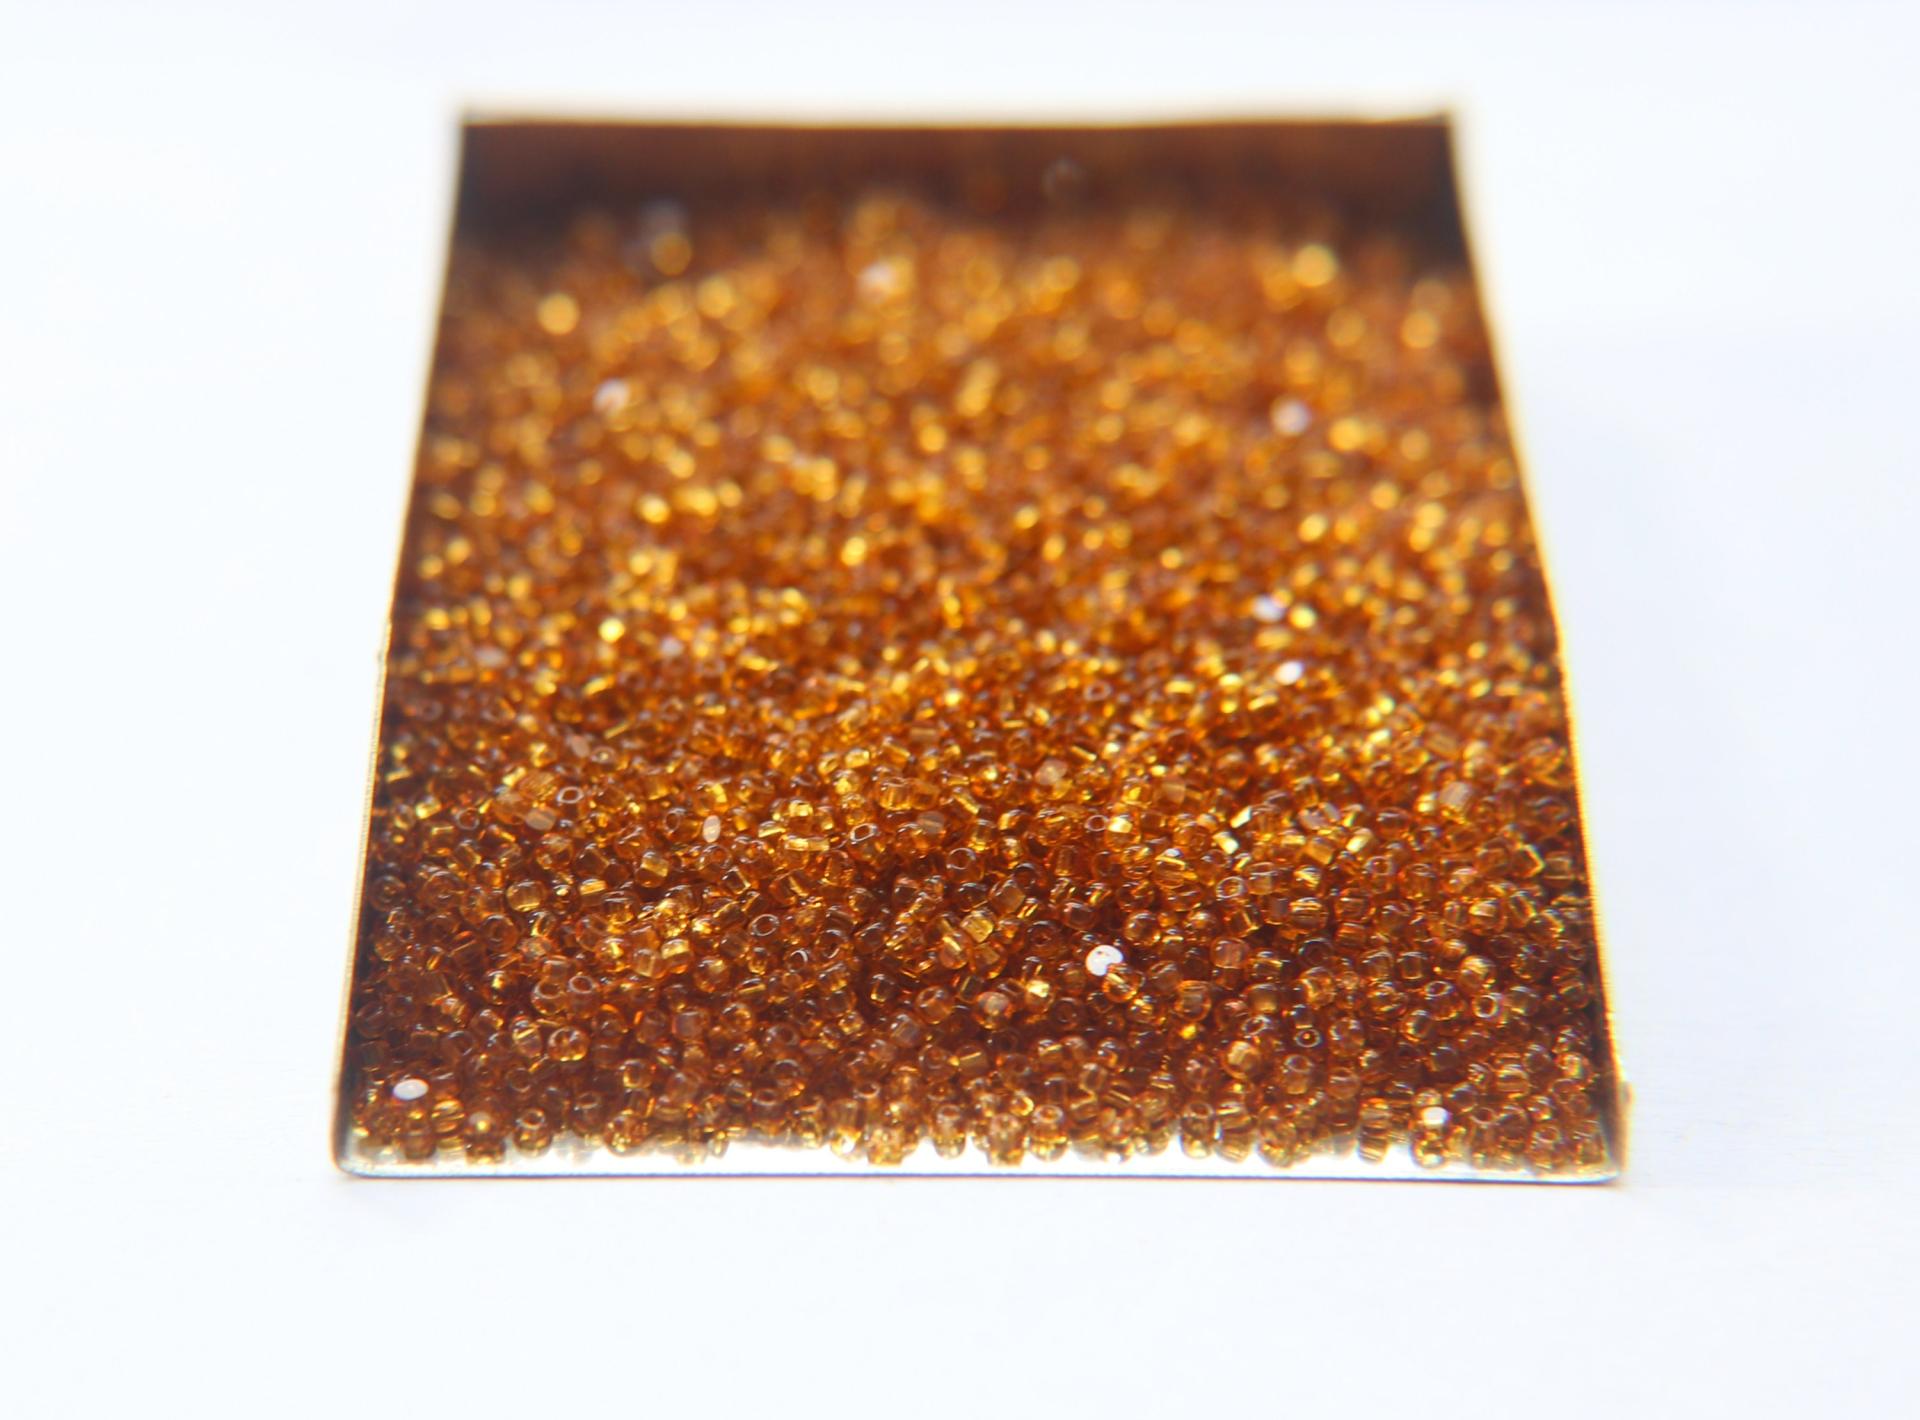 13/0 Charlotte Cut Beads 10070 Medium Topaz Transparent 5/10/20/50/250/500 native supplies, jewelry making, embroidery materials, vintage